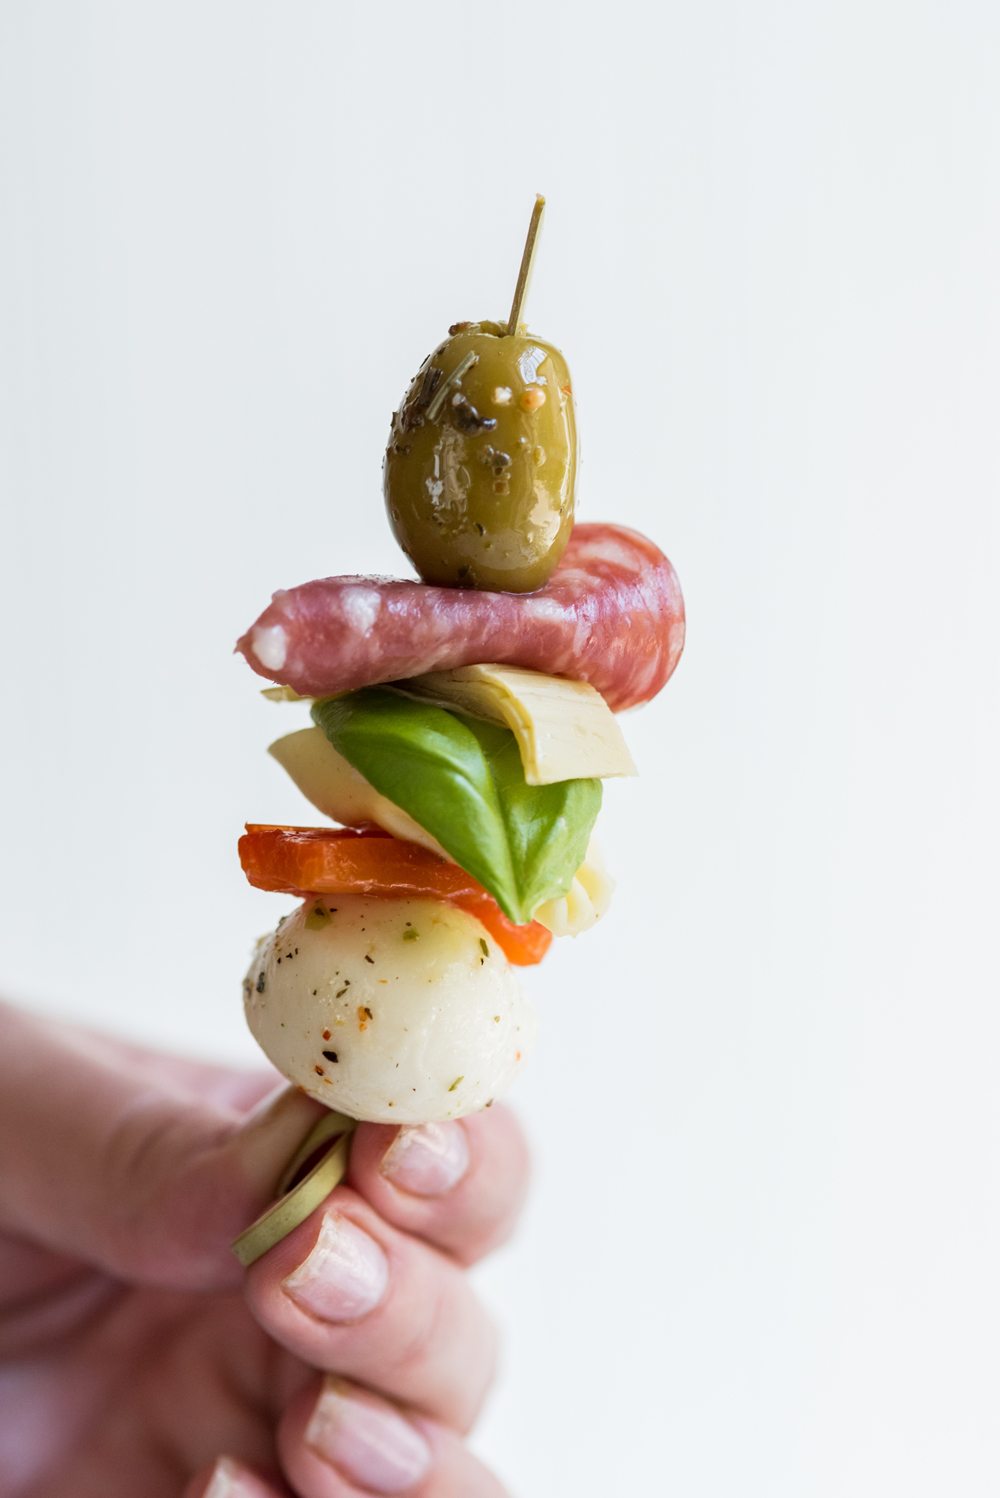 Antipasto Skewers | Party appetizers, entertaining ideas, party ideas, party recipes and more from @cydconverse